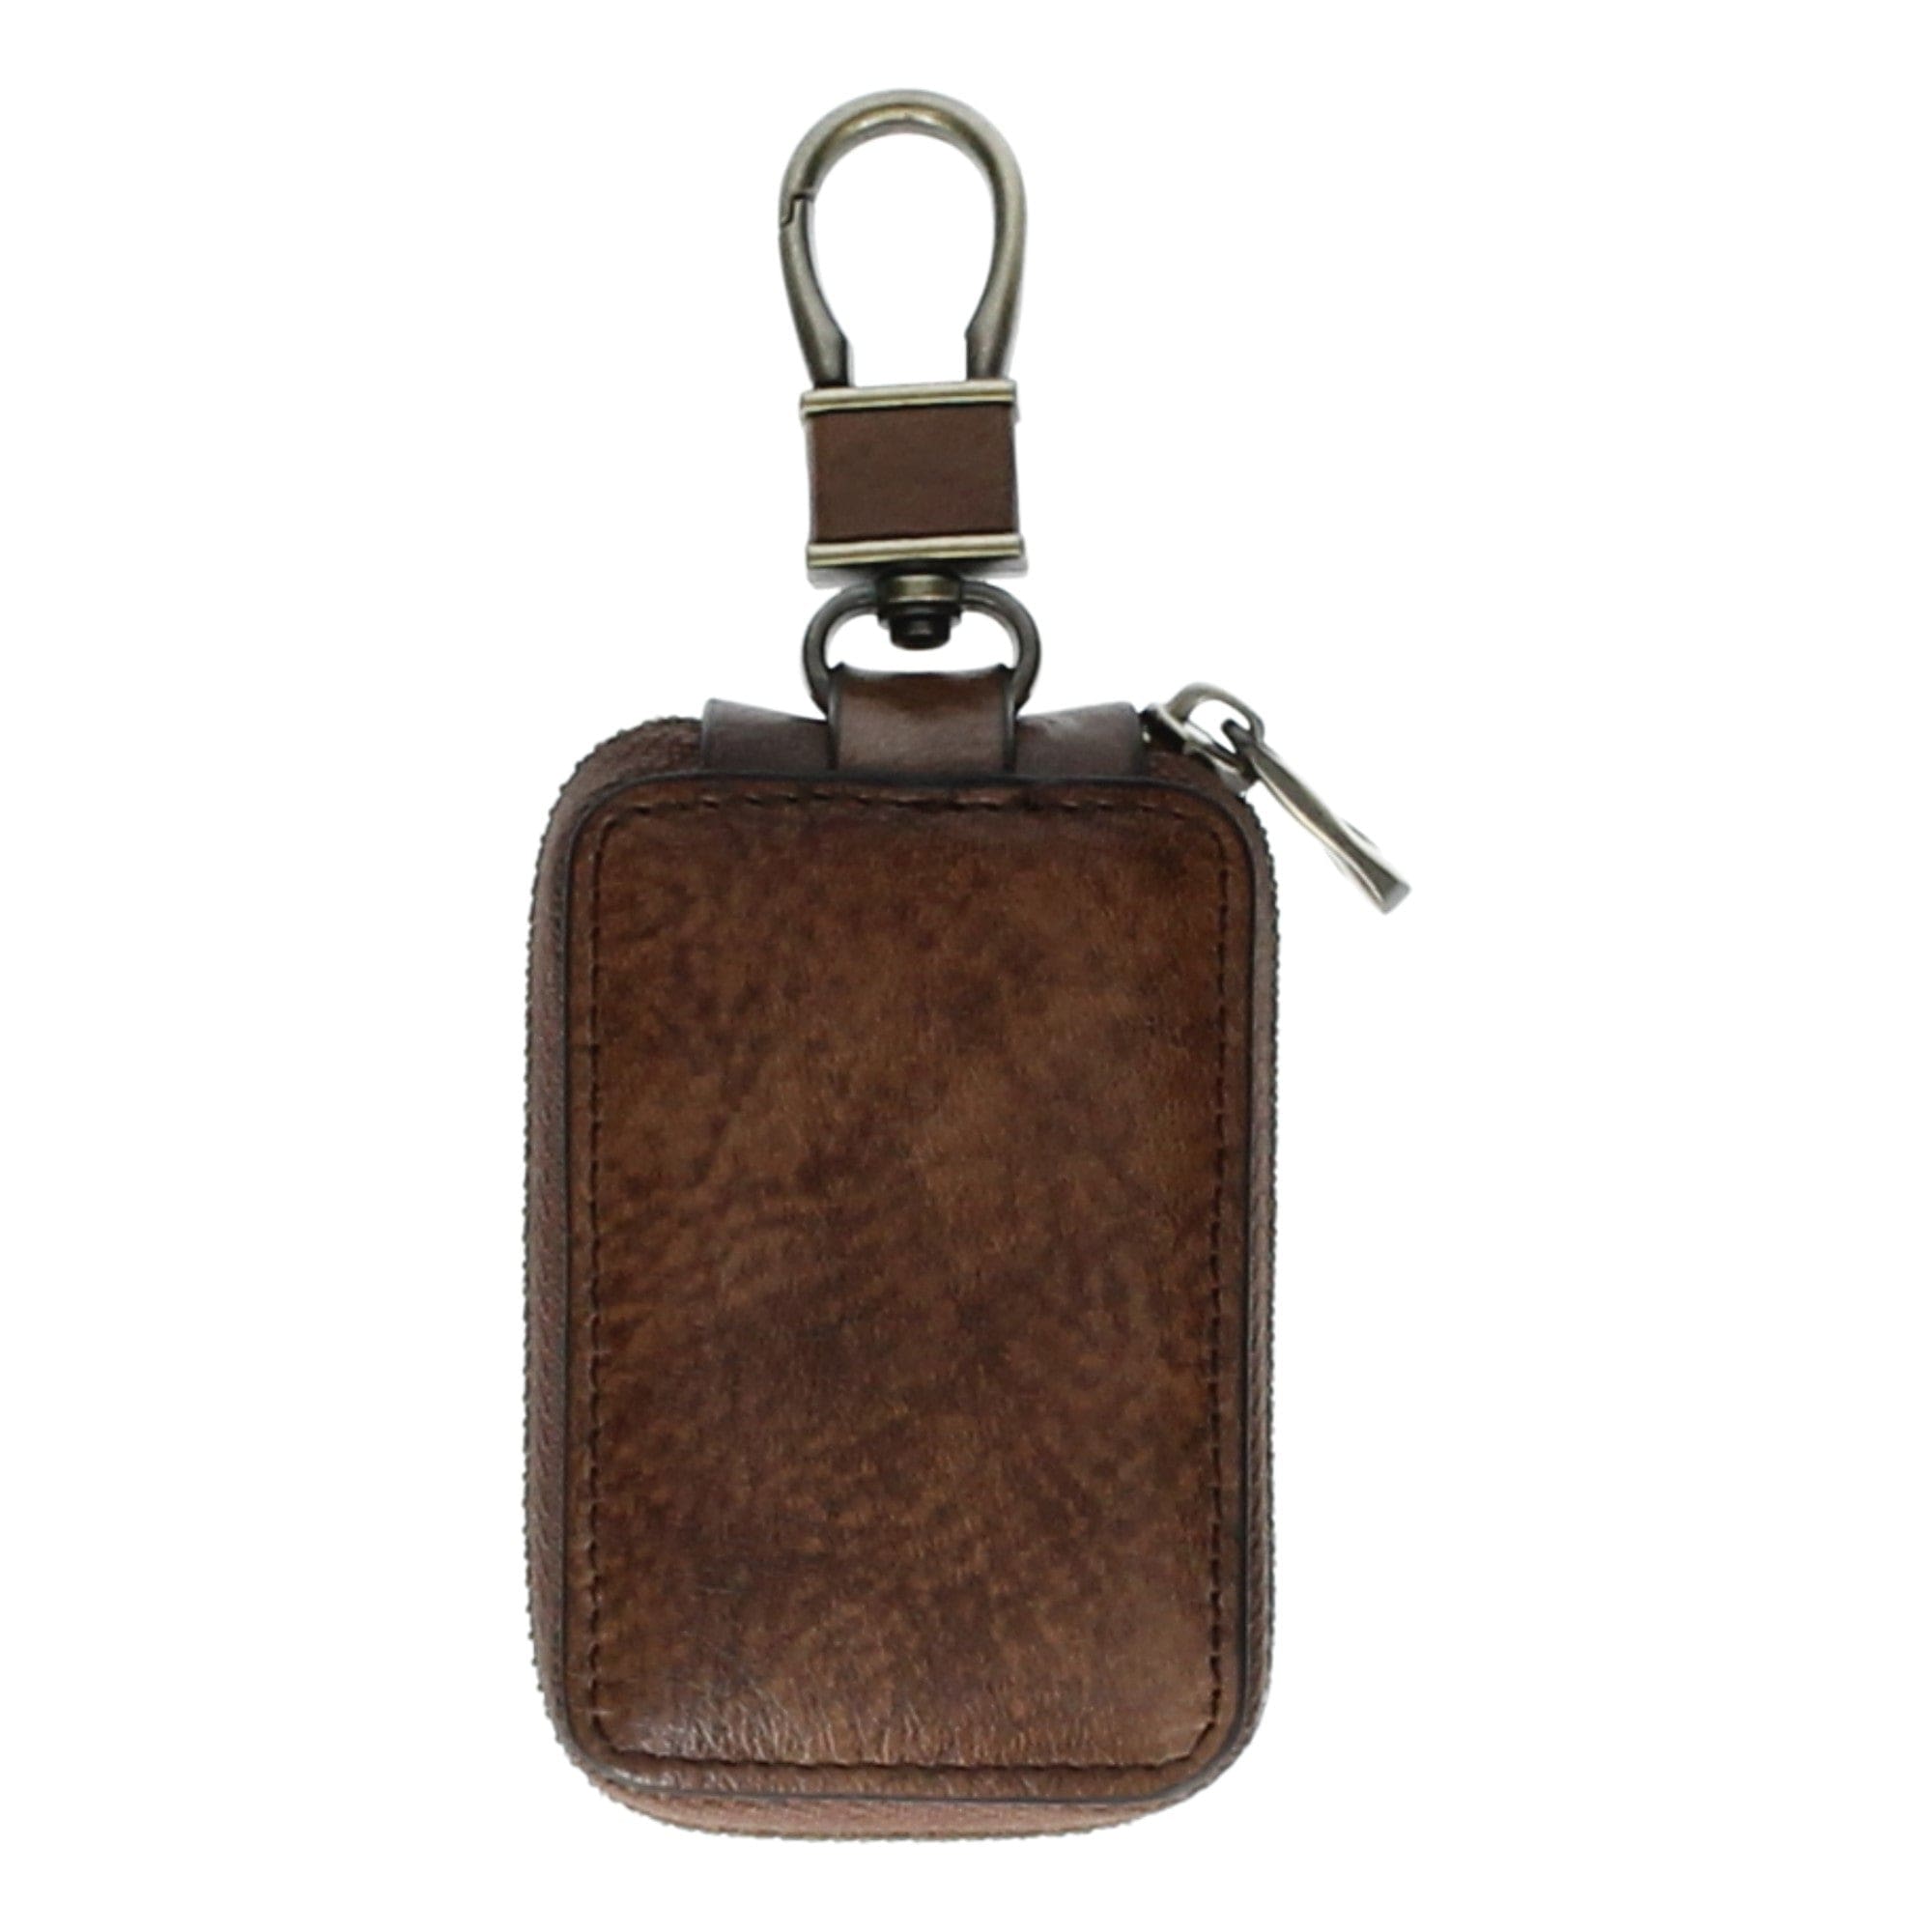 Leather key ring and wallet with snap hook - Brown - Small leather goods